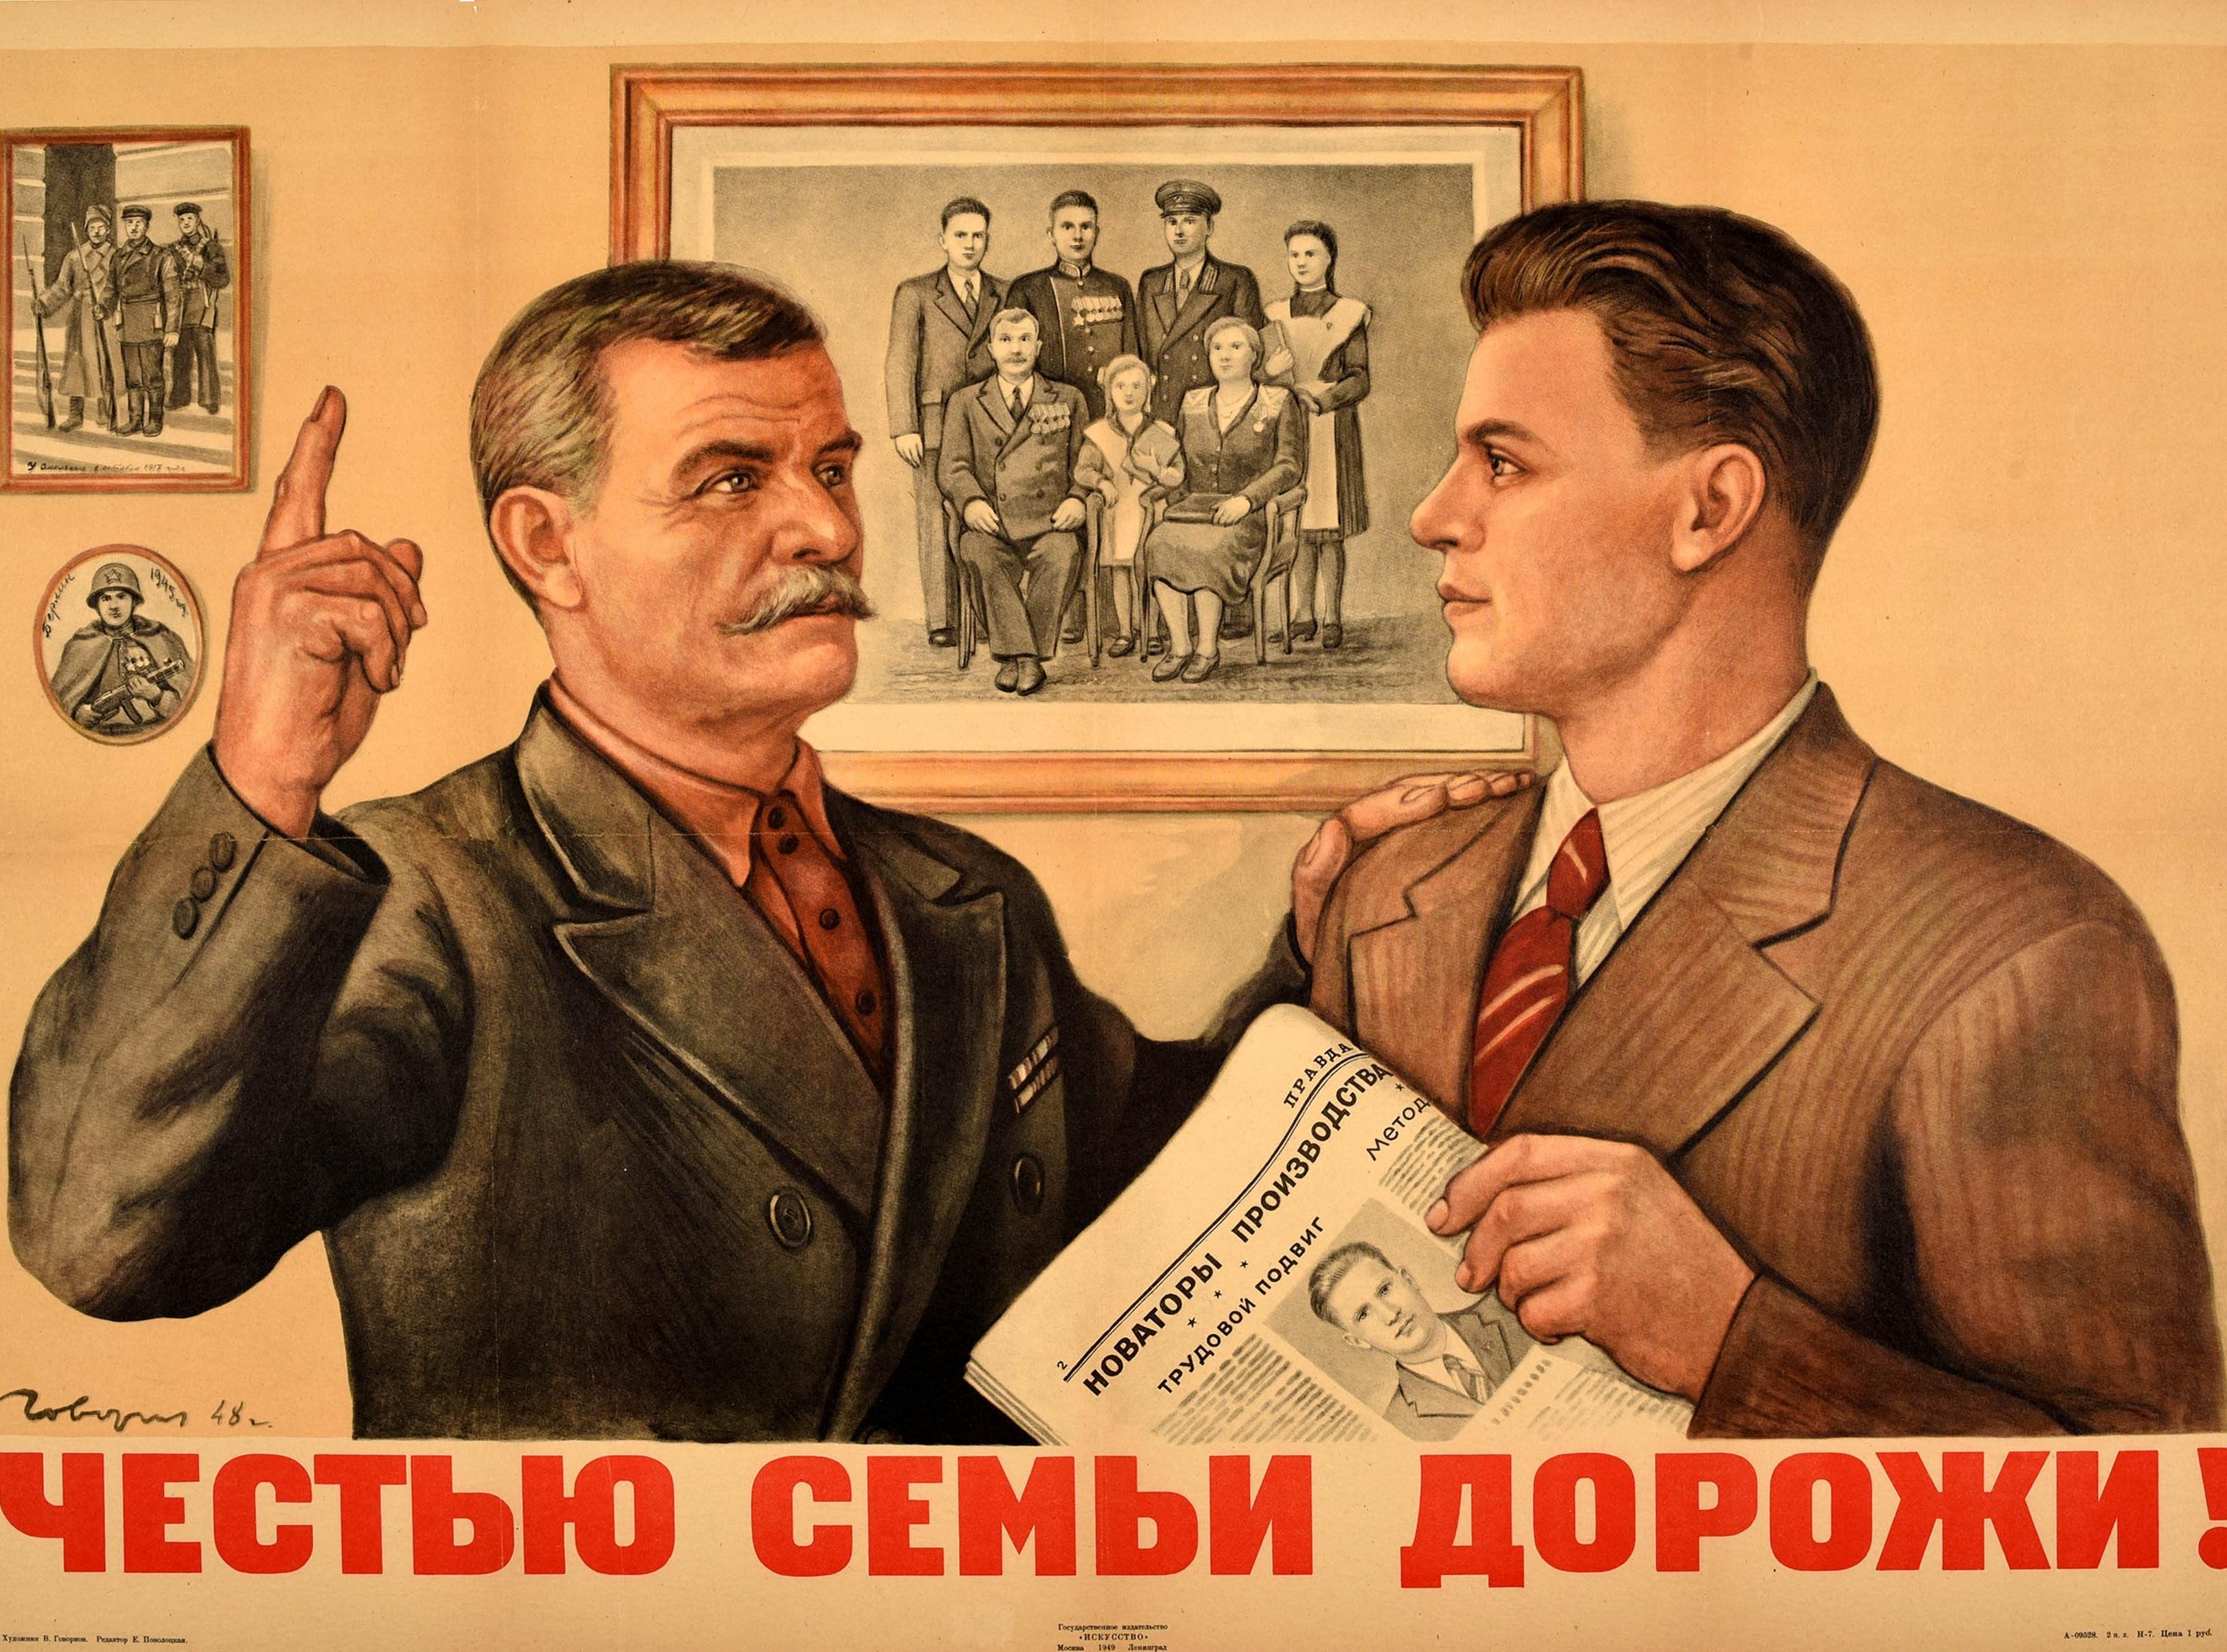 Original vintage Soviet propaganda poster - Treasure the Honour of the Family! - featuring the quote below artwork showing an elderly man pointing to three photographs on a wall of men in military uniform, a soldier and a family together, his other